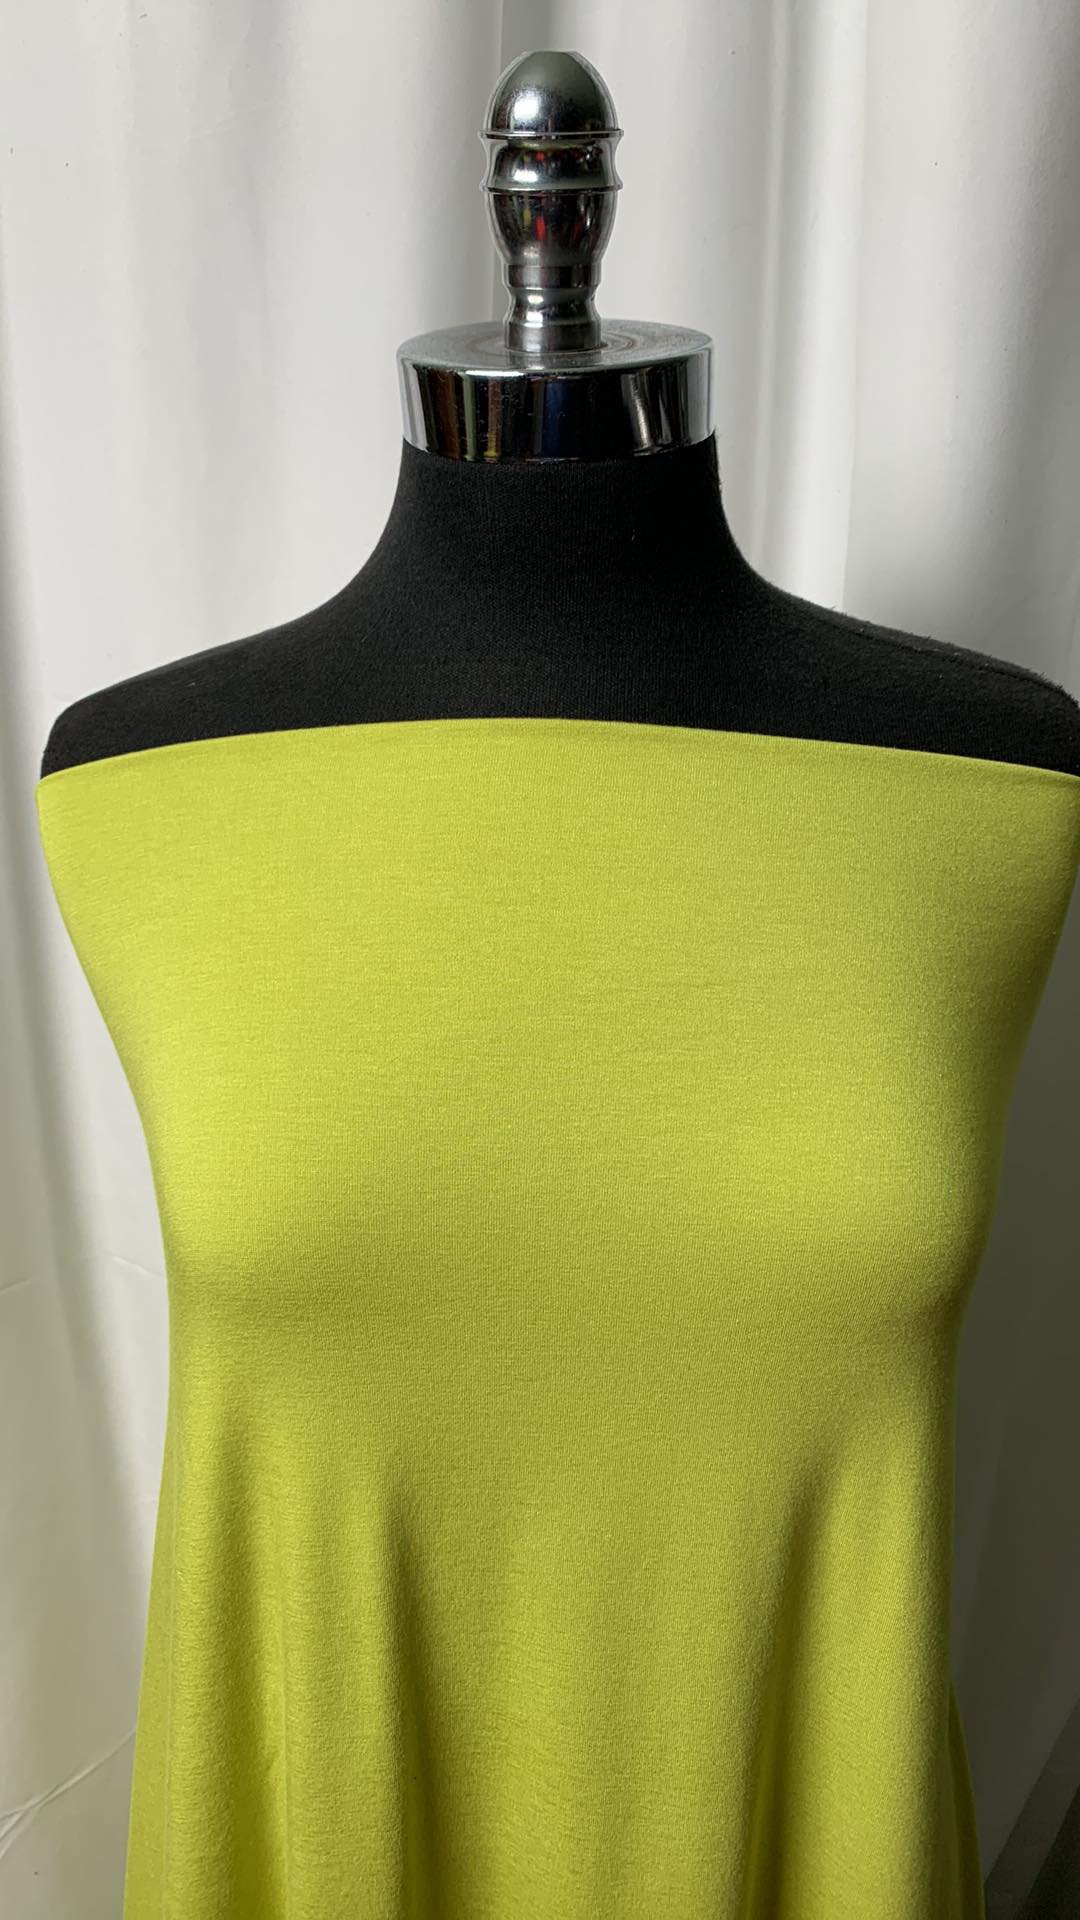 Solid Citrus - Bamboo/Cotton/Spandex - By the Yard